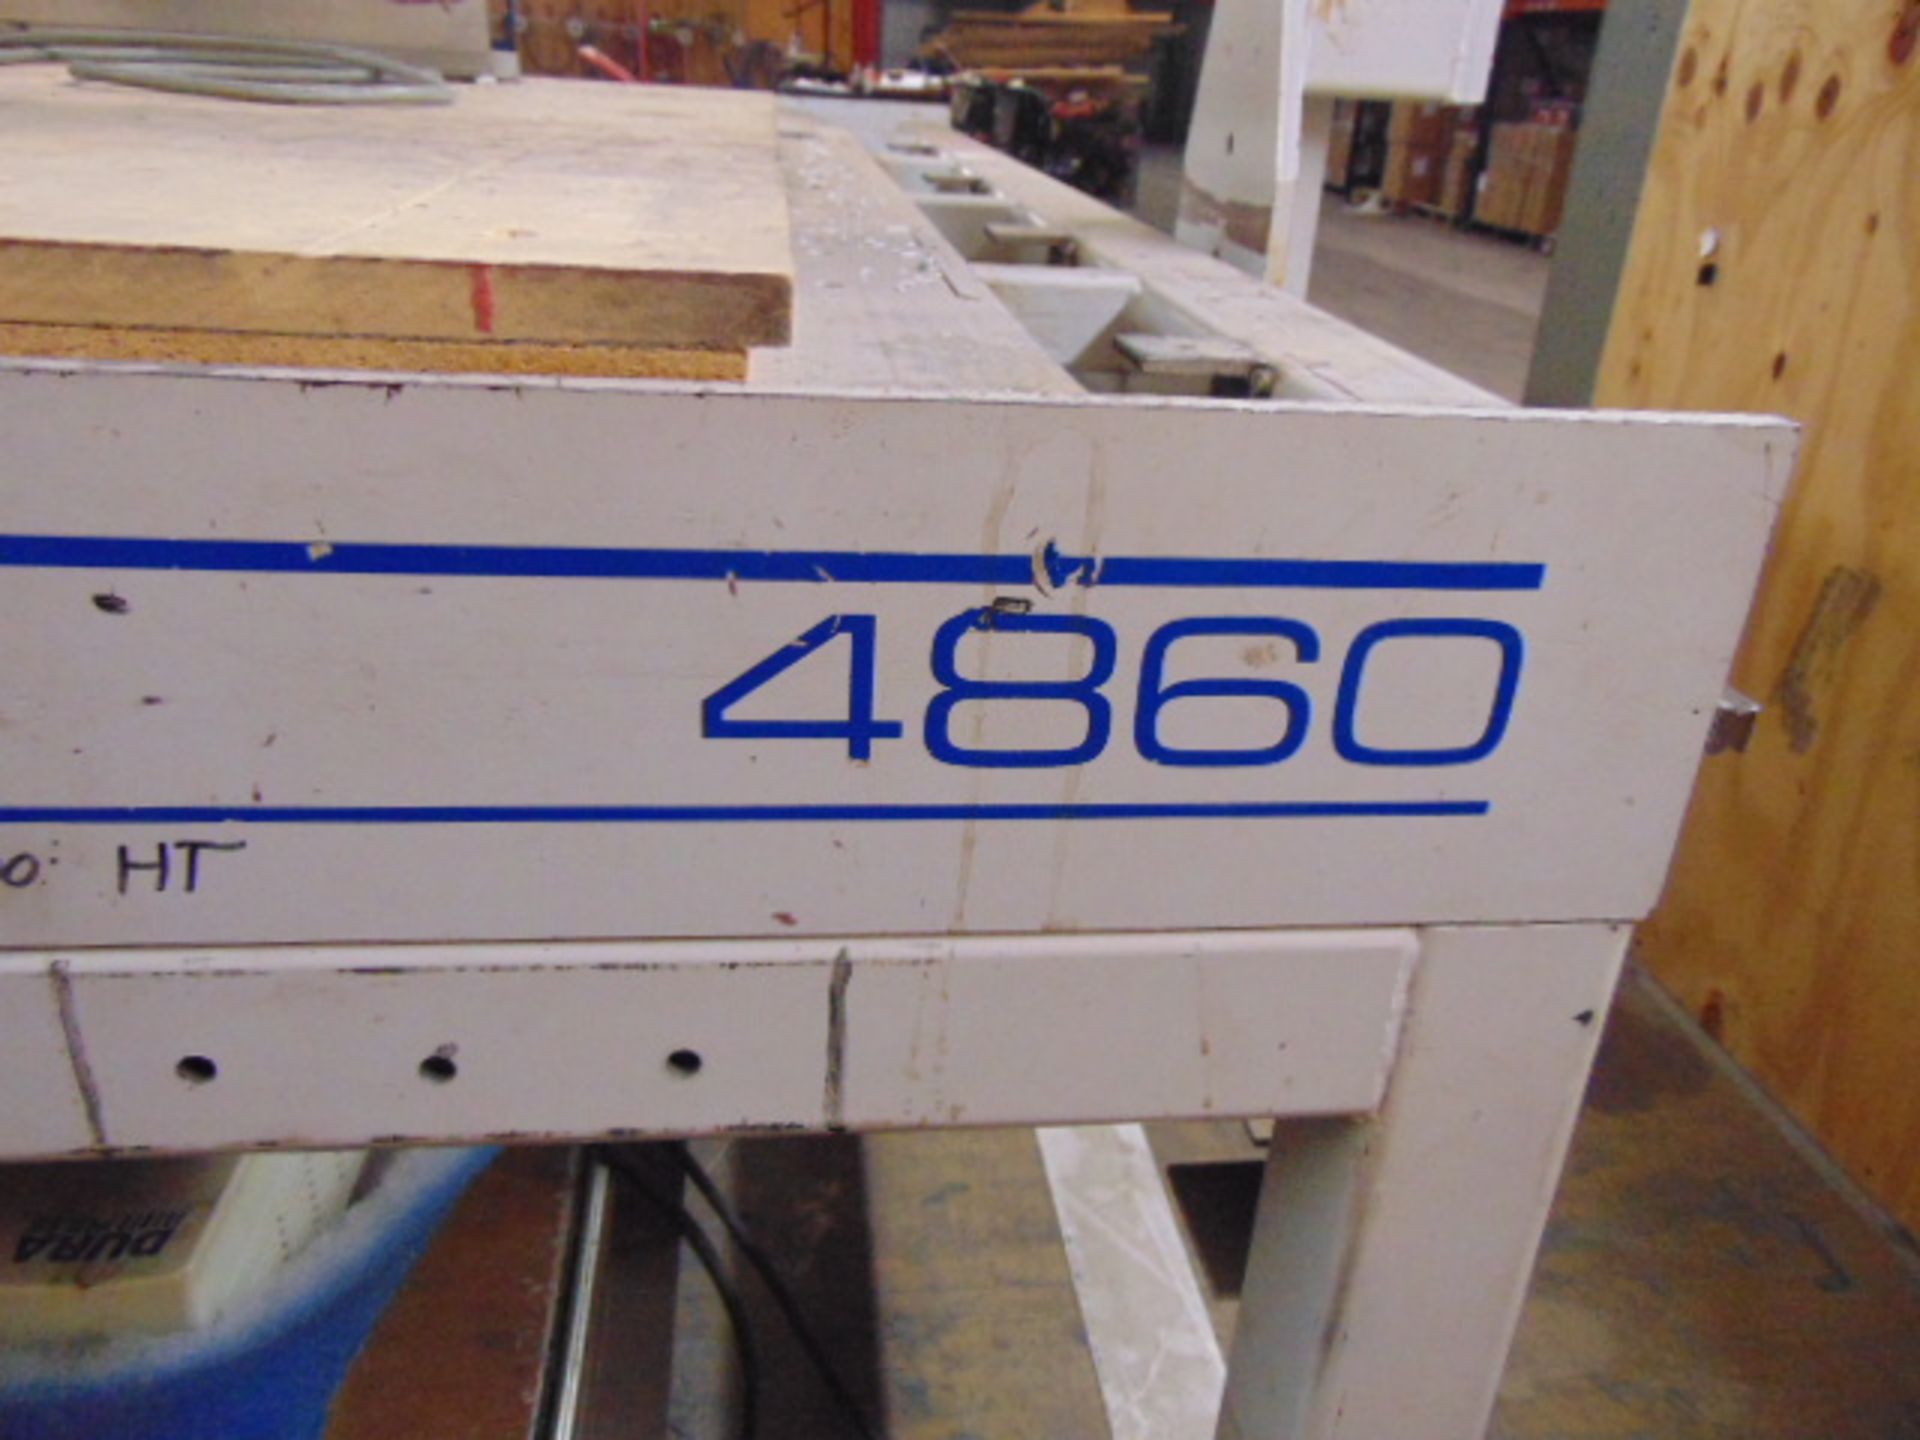 PROGRAMMABLE ROUTER TABLE, SHOP SABRE MDL. 4860 (no computer) - Image 5 of 6